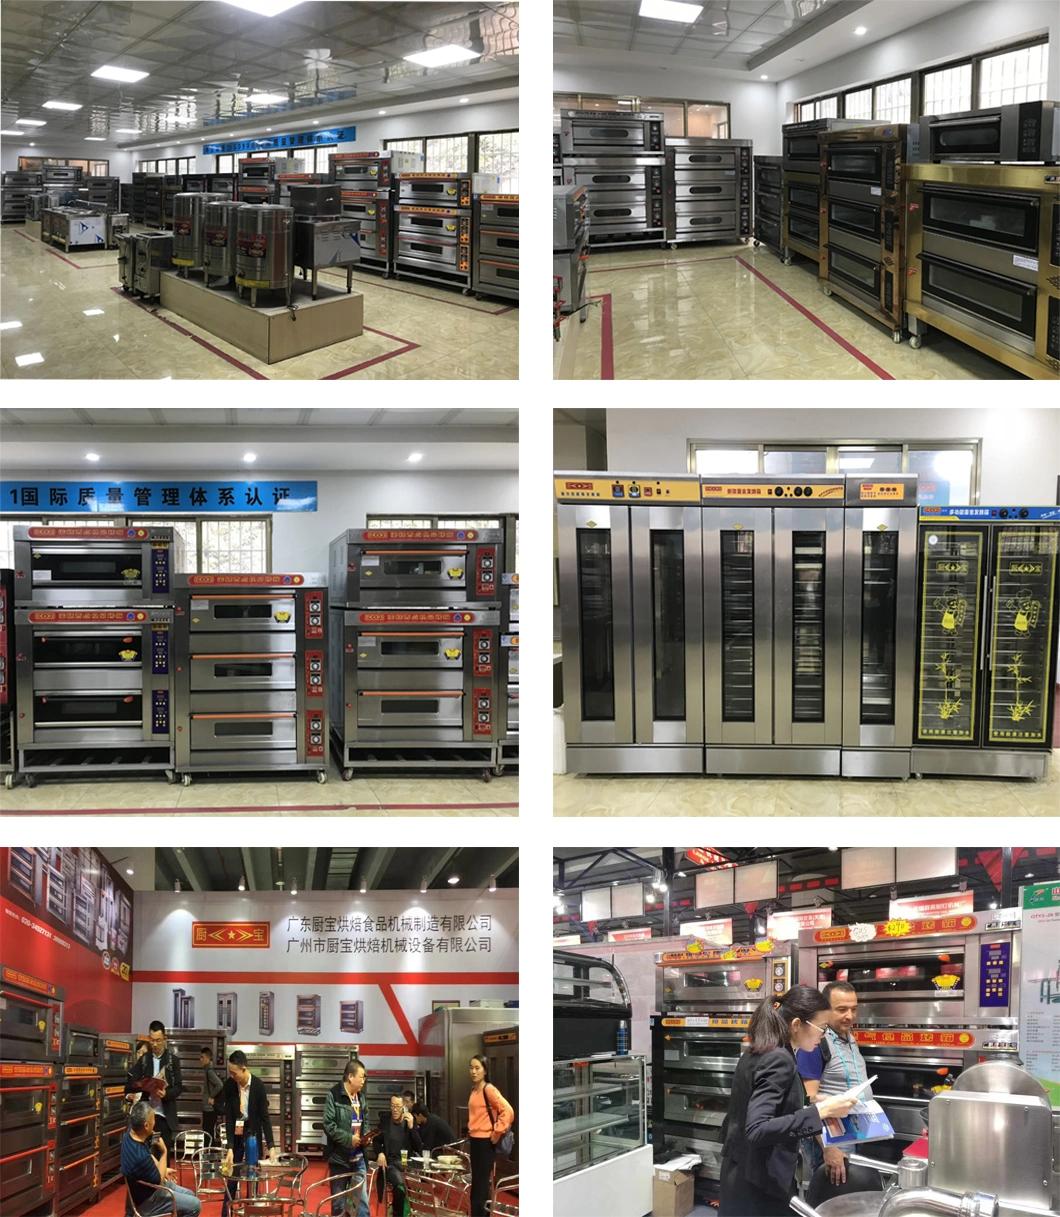 4 Deck 16 Trays High Quality Electric Oven for Commercial Restaurant Kitchen Baking Equipment Bakery Machinery Bread Oven